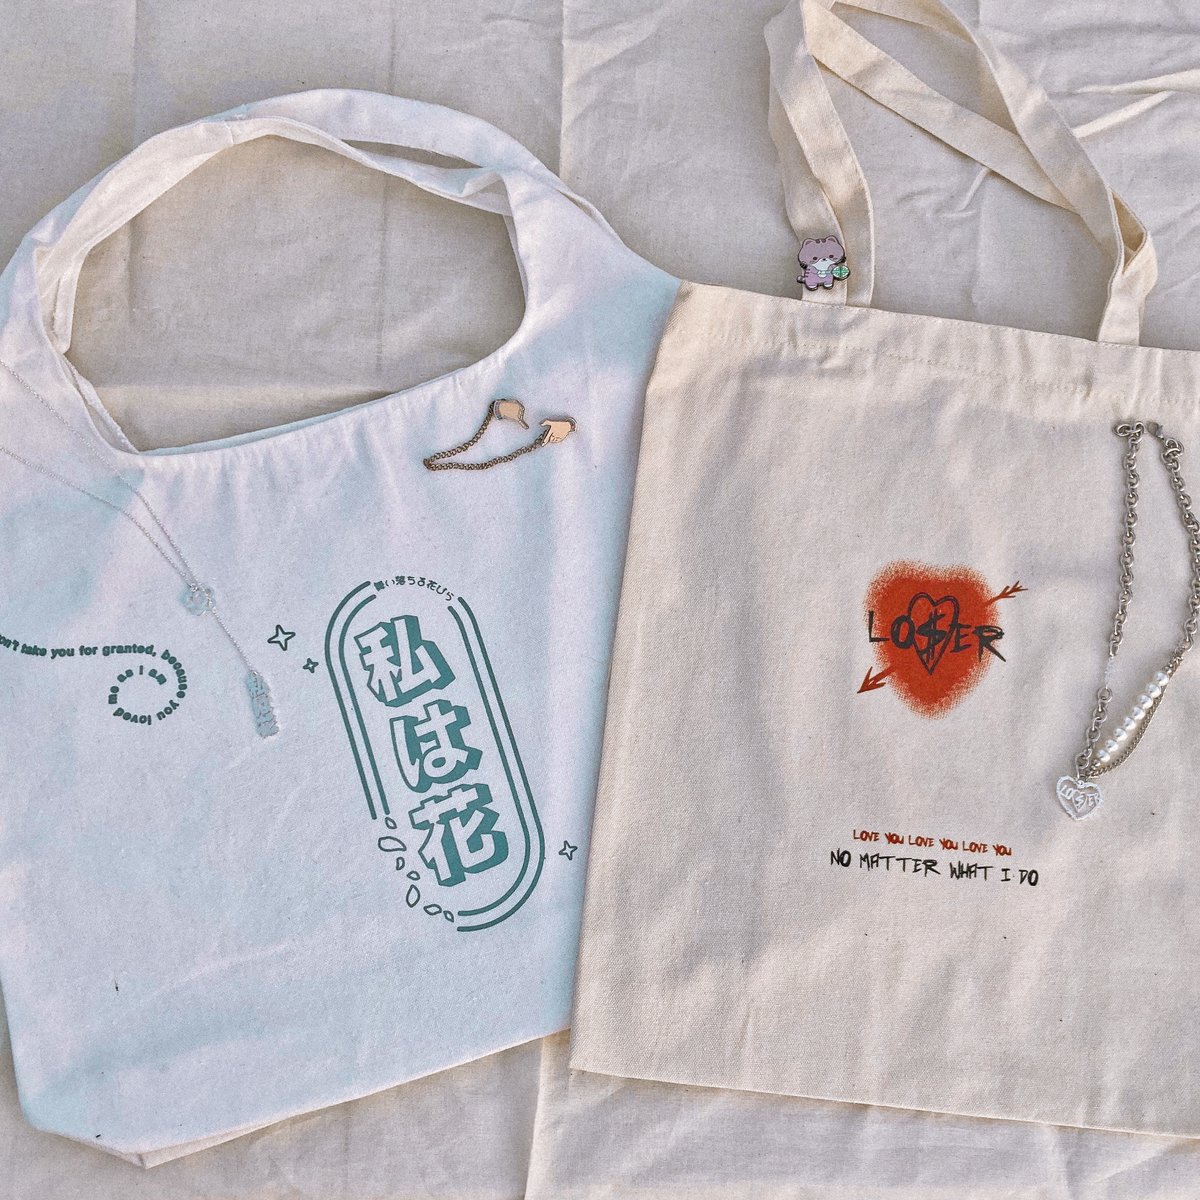 TXT and SVT Tote Bags